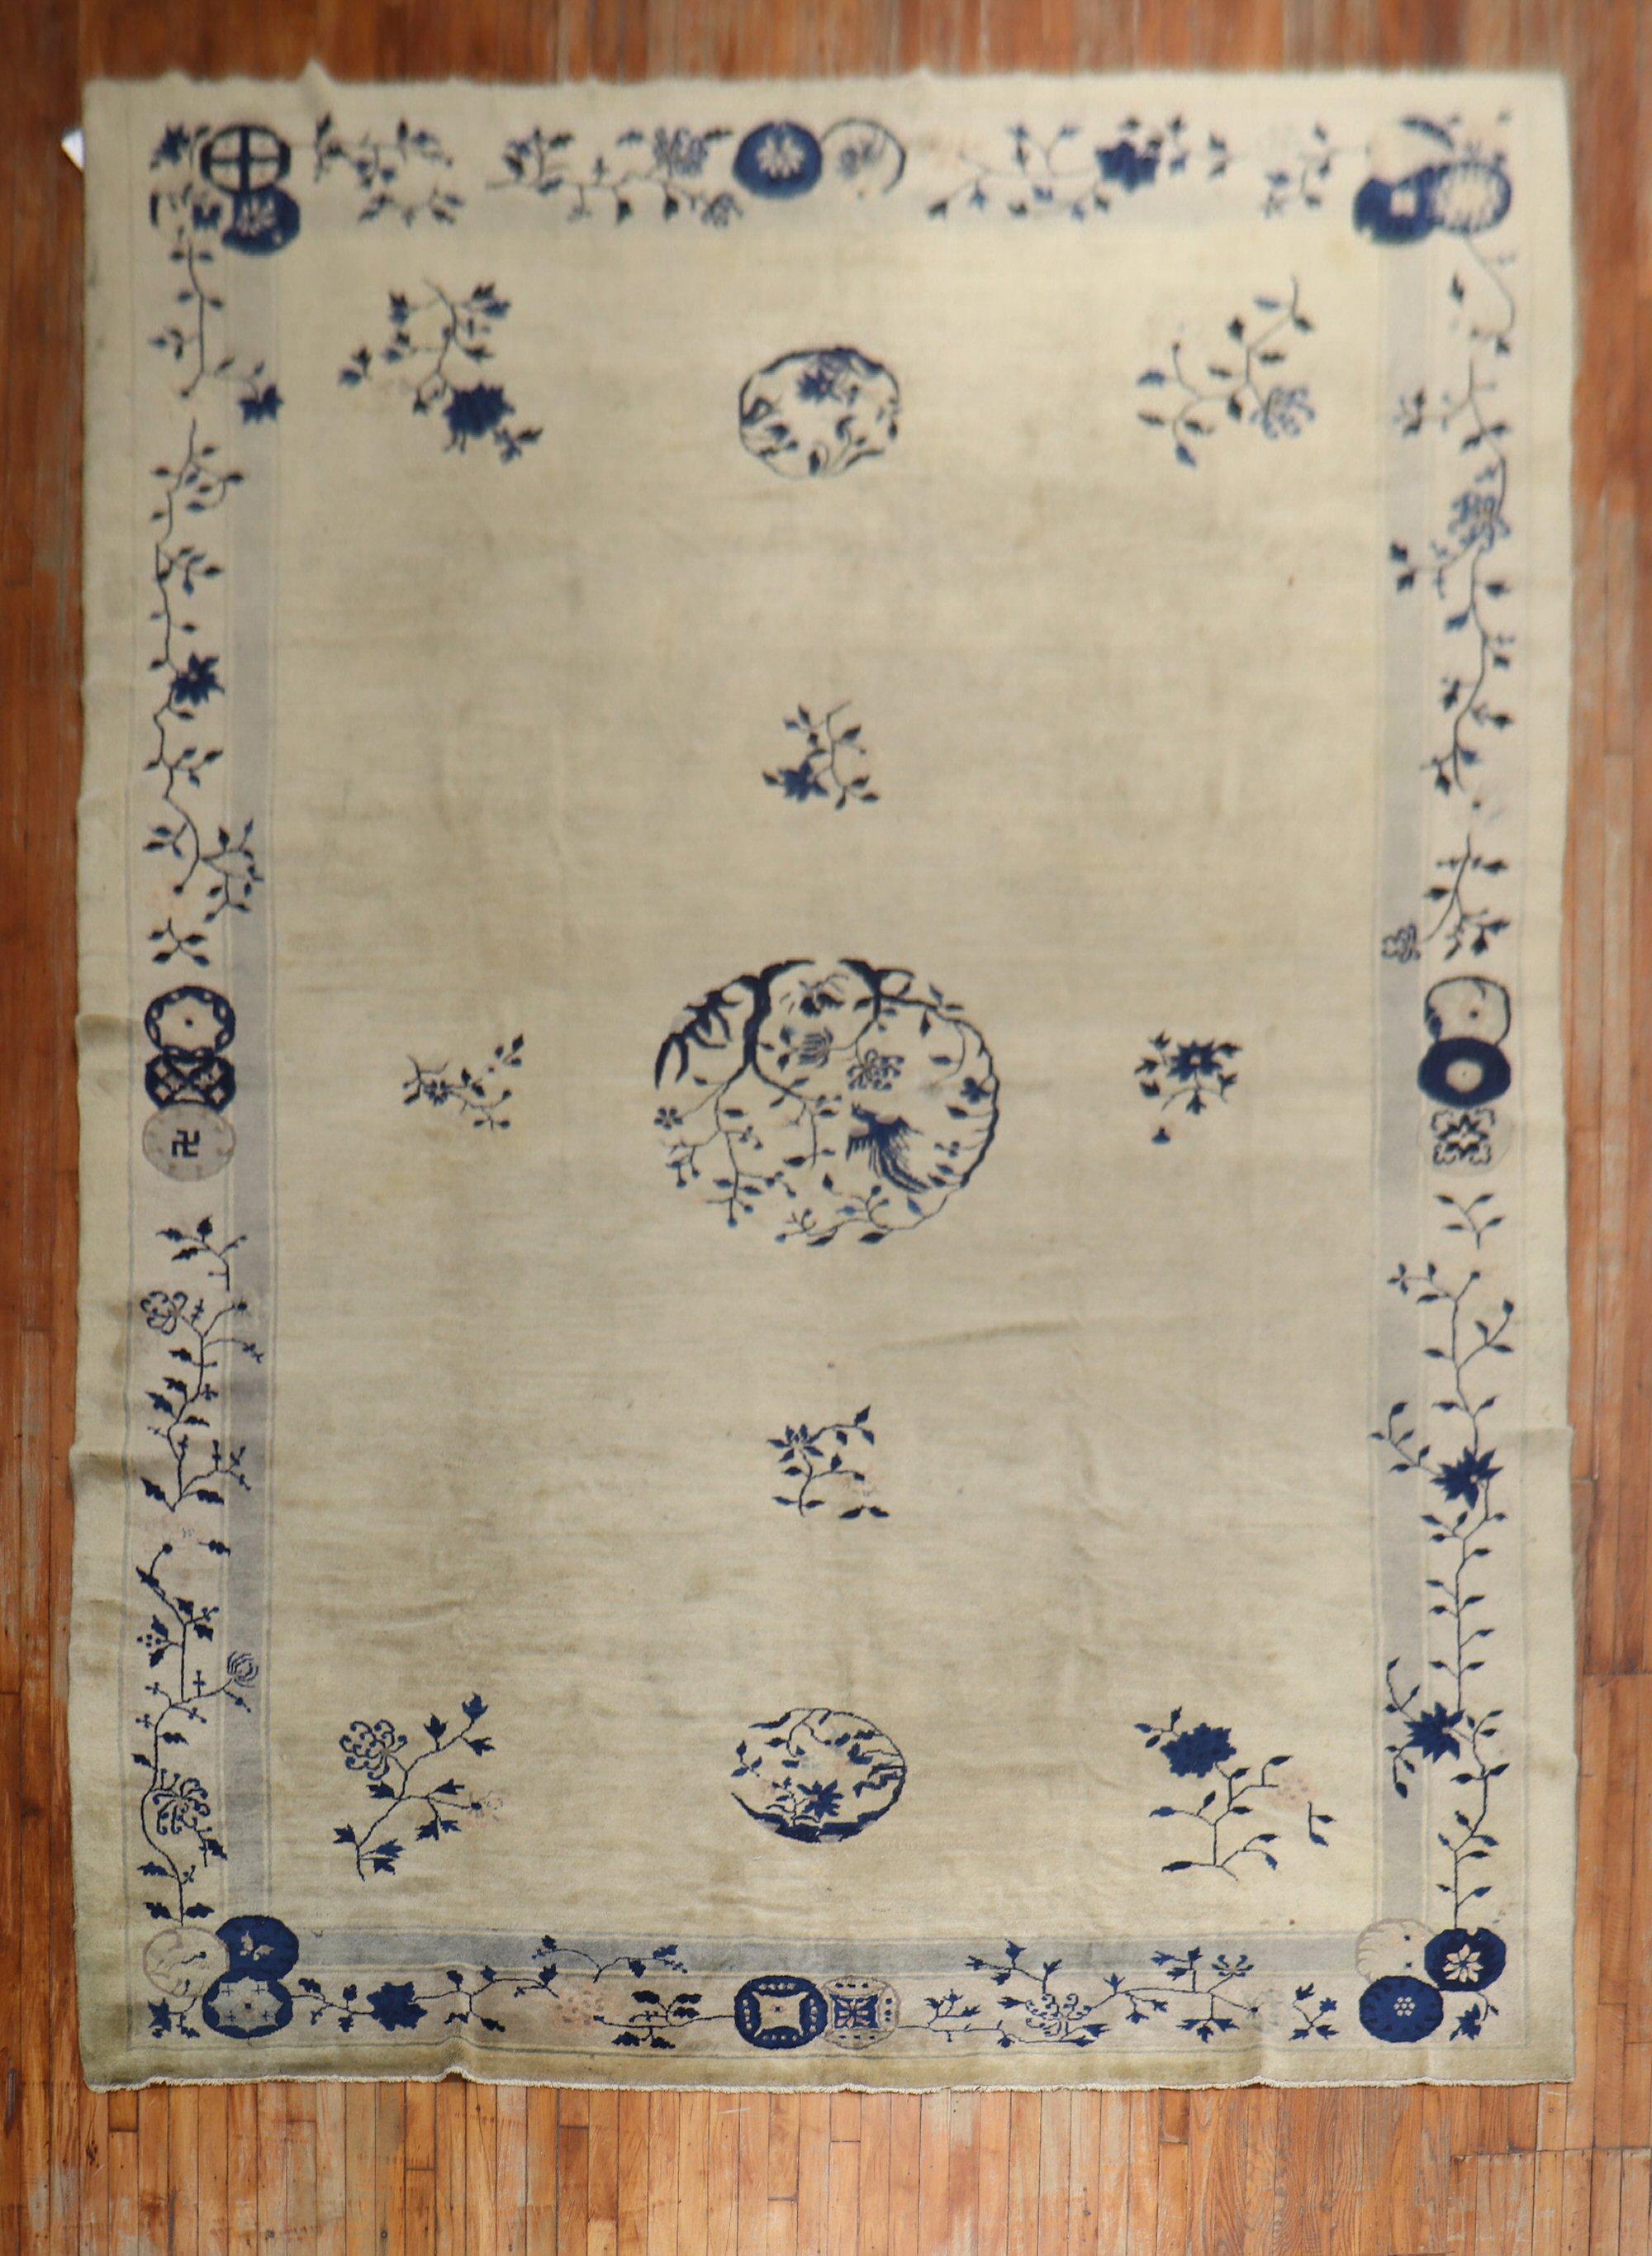 An early-20th-century room size Chinese rug in the navy, beige, and gray color family. The wool and feel of the rug is very soft on the feet. It has a silky sheen to it as well.

Measures: 9'3'' x 14'3''.